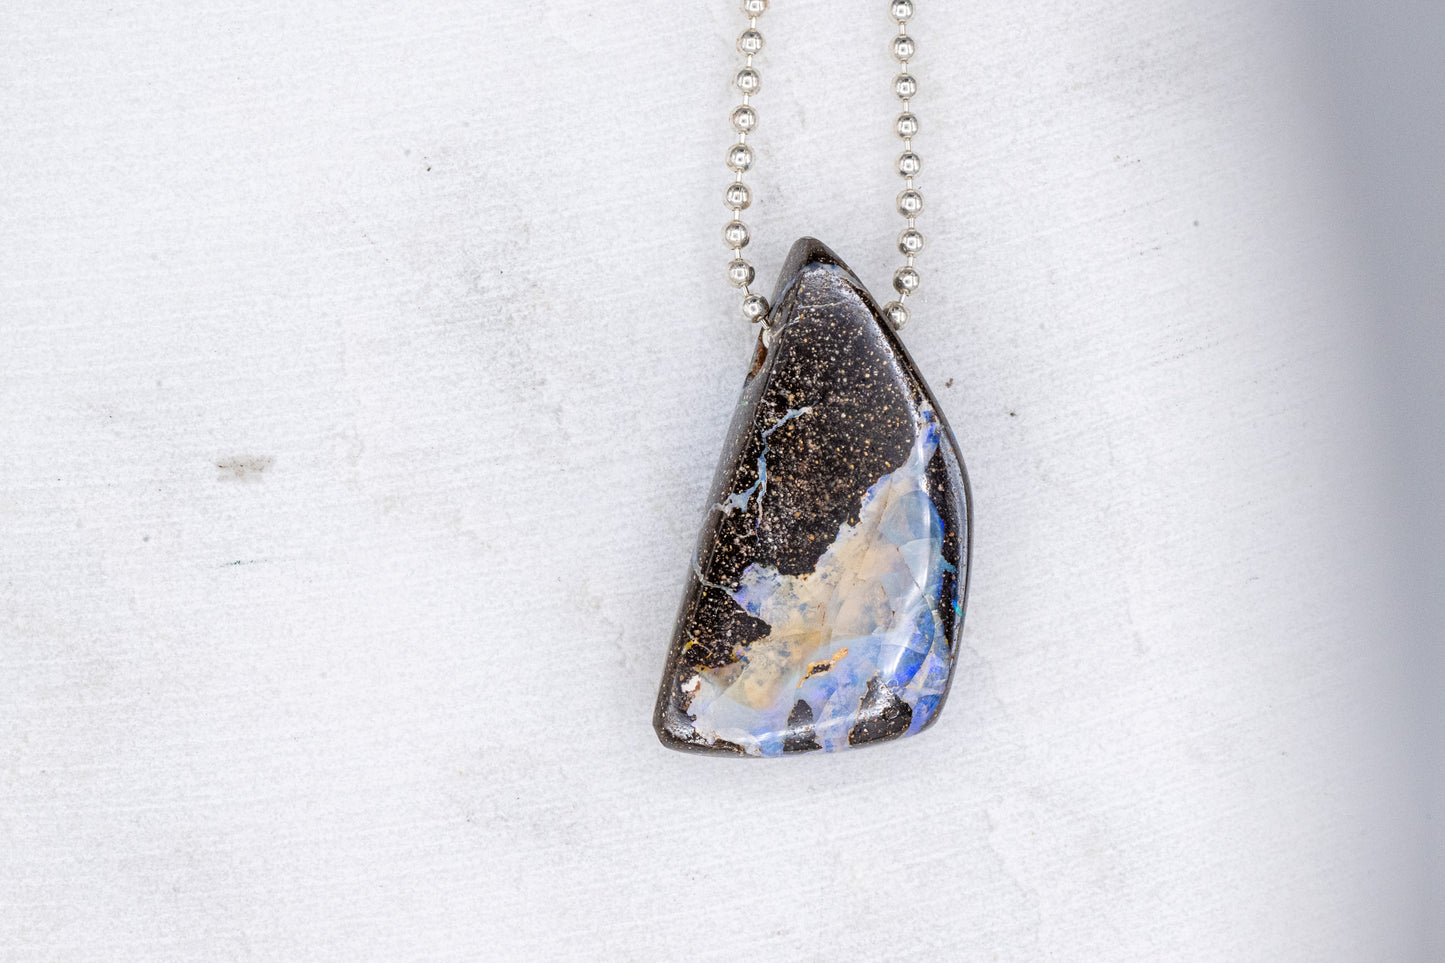 Handmade Australian Opal Necklace with a blue and brown stone sold by Cassin Jewelry.